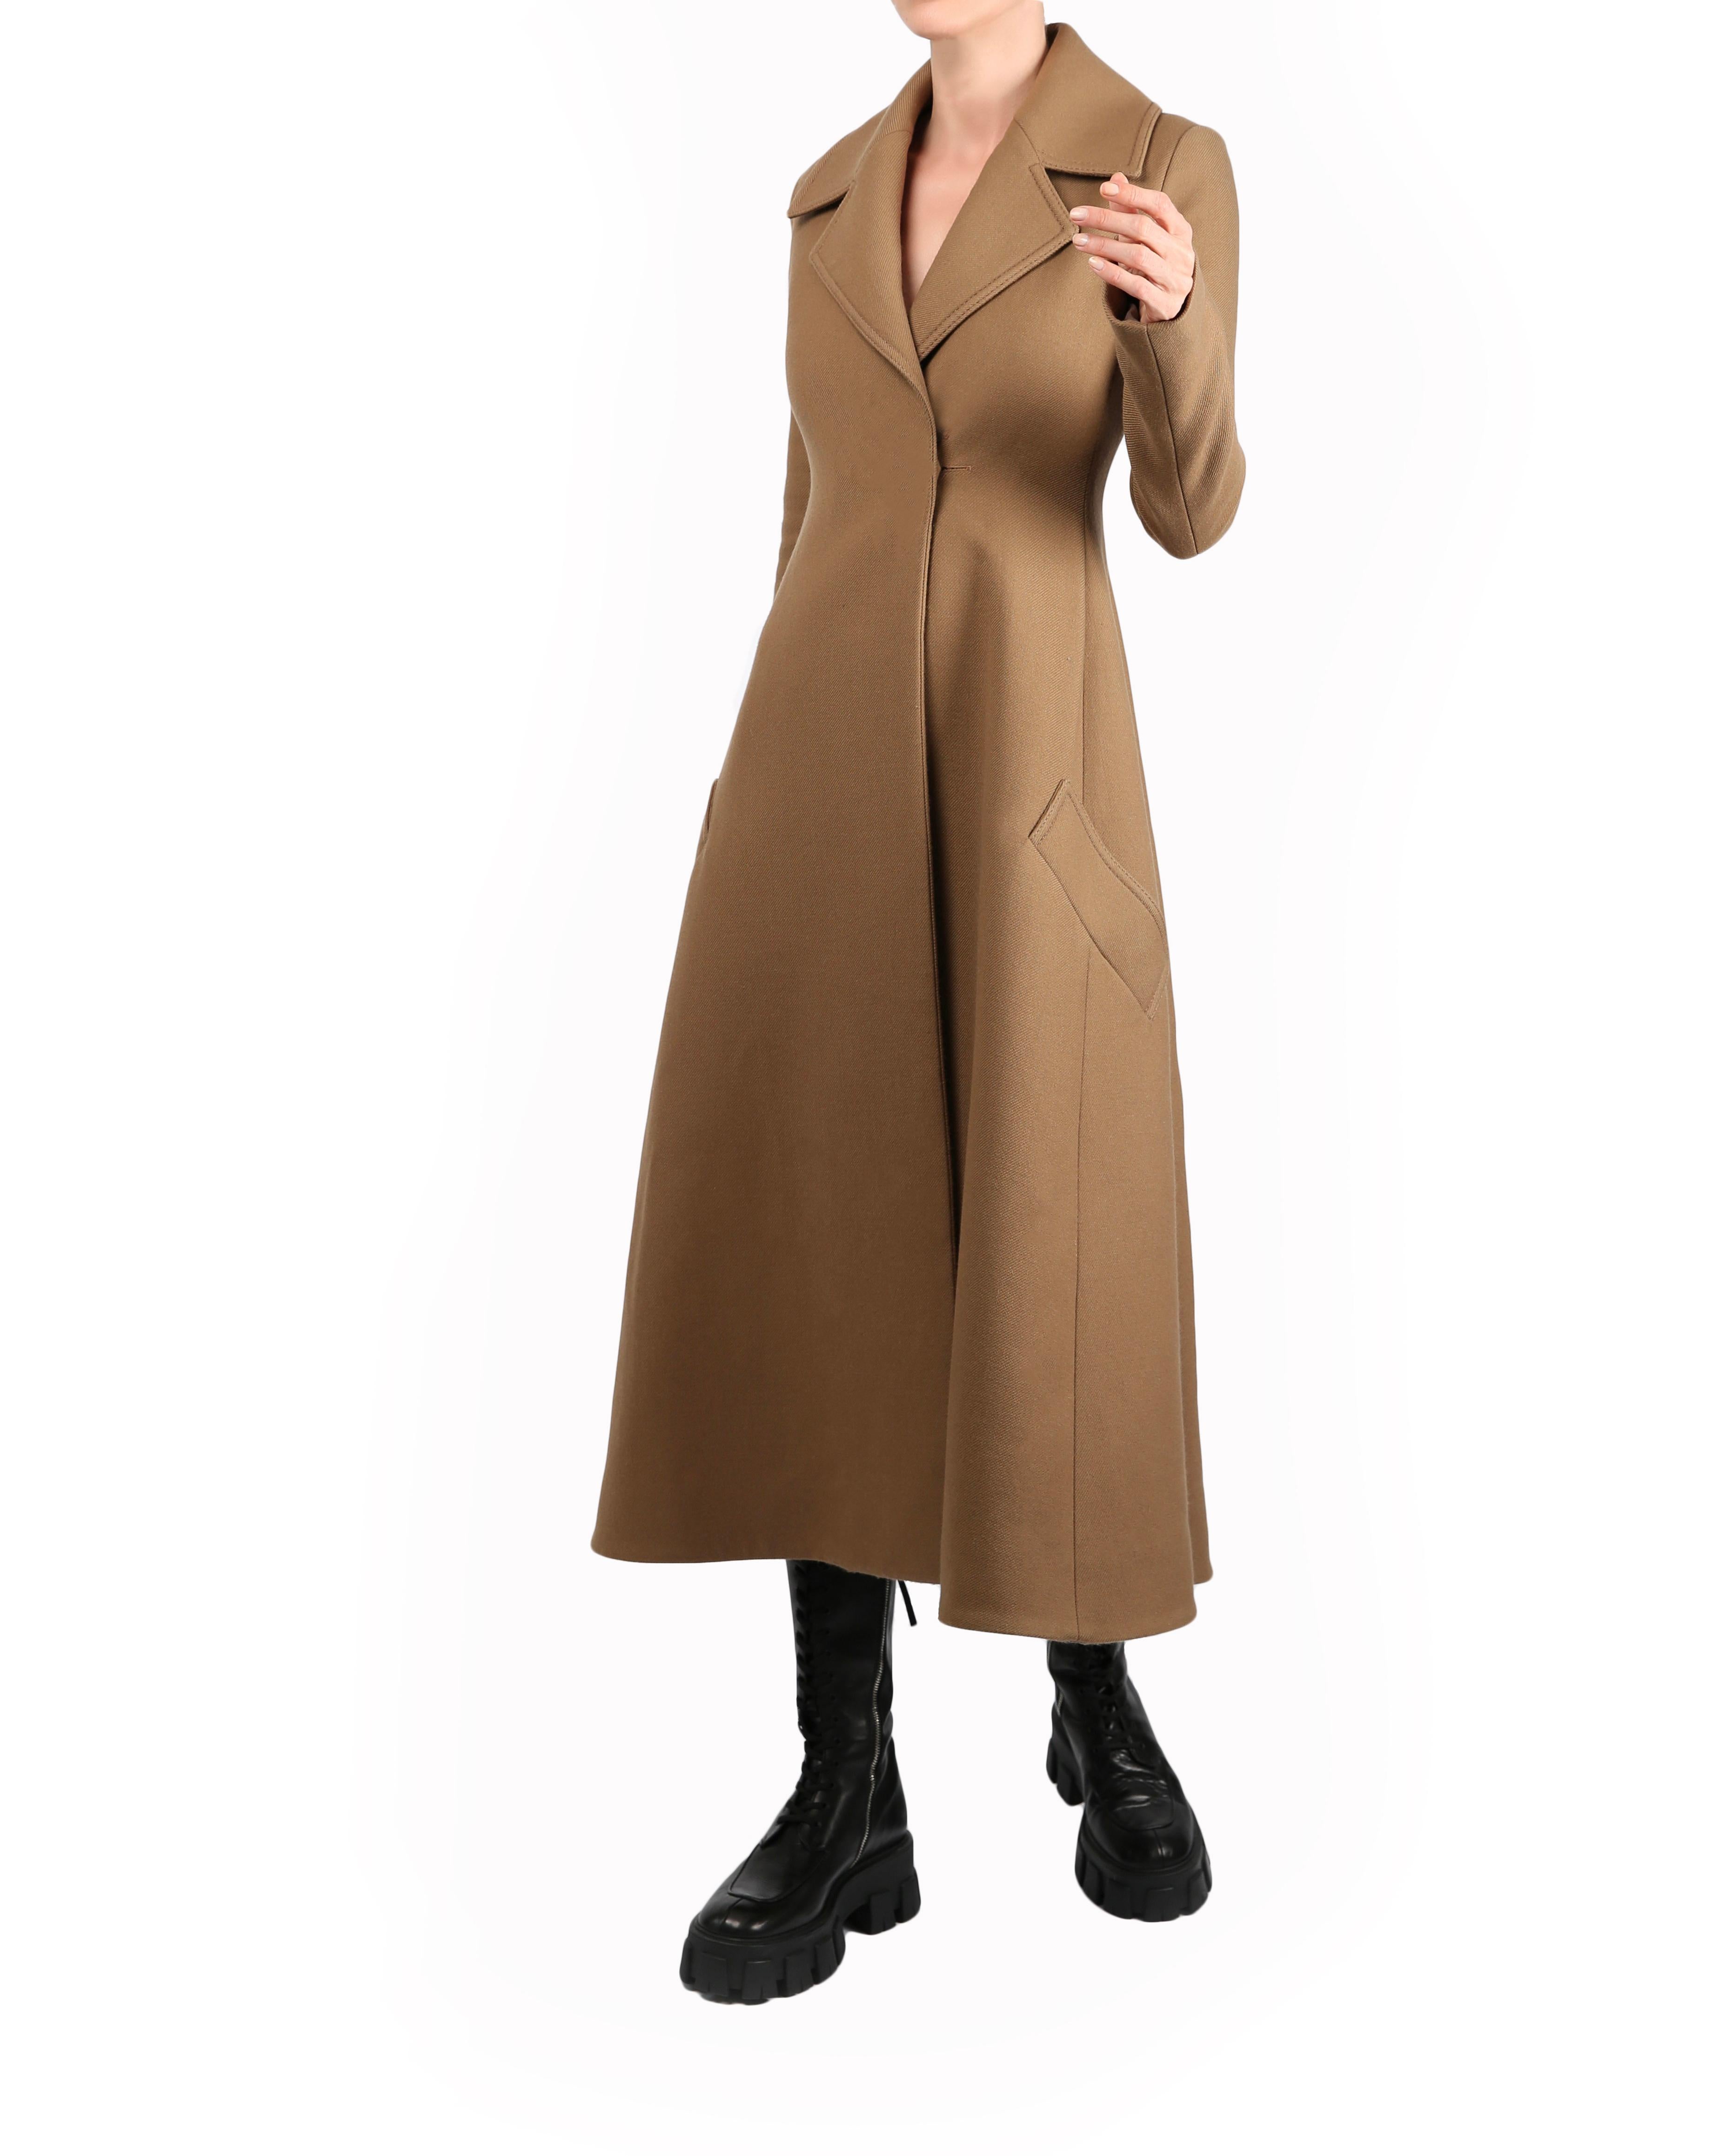 Brown Celine Fall 2014 Phoebe Philo  gabardine wool fit and flare maxi coat in camel